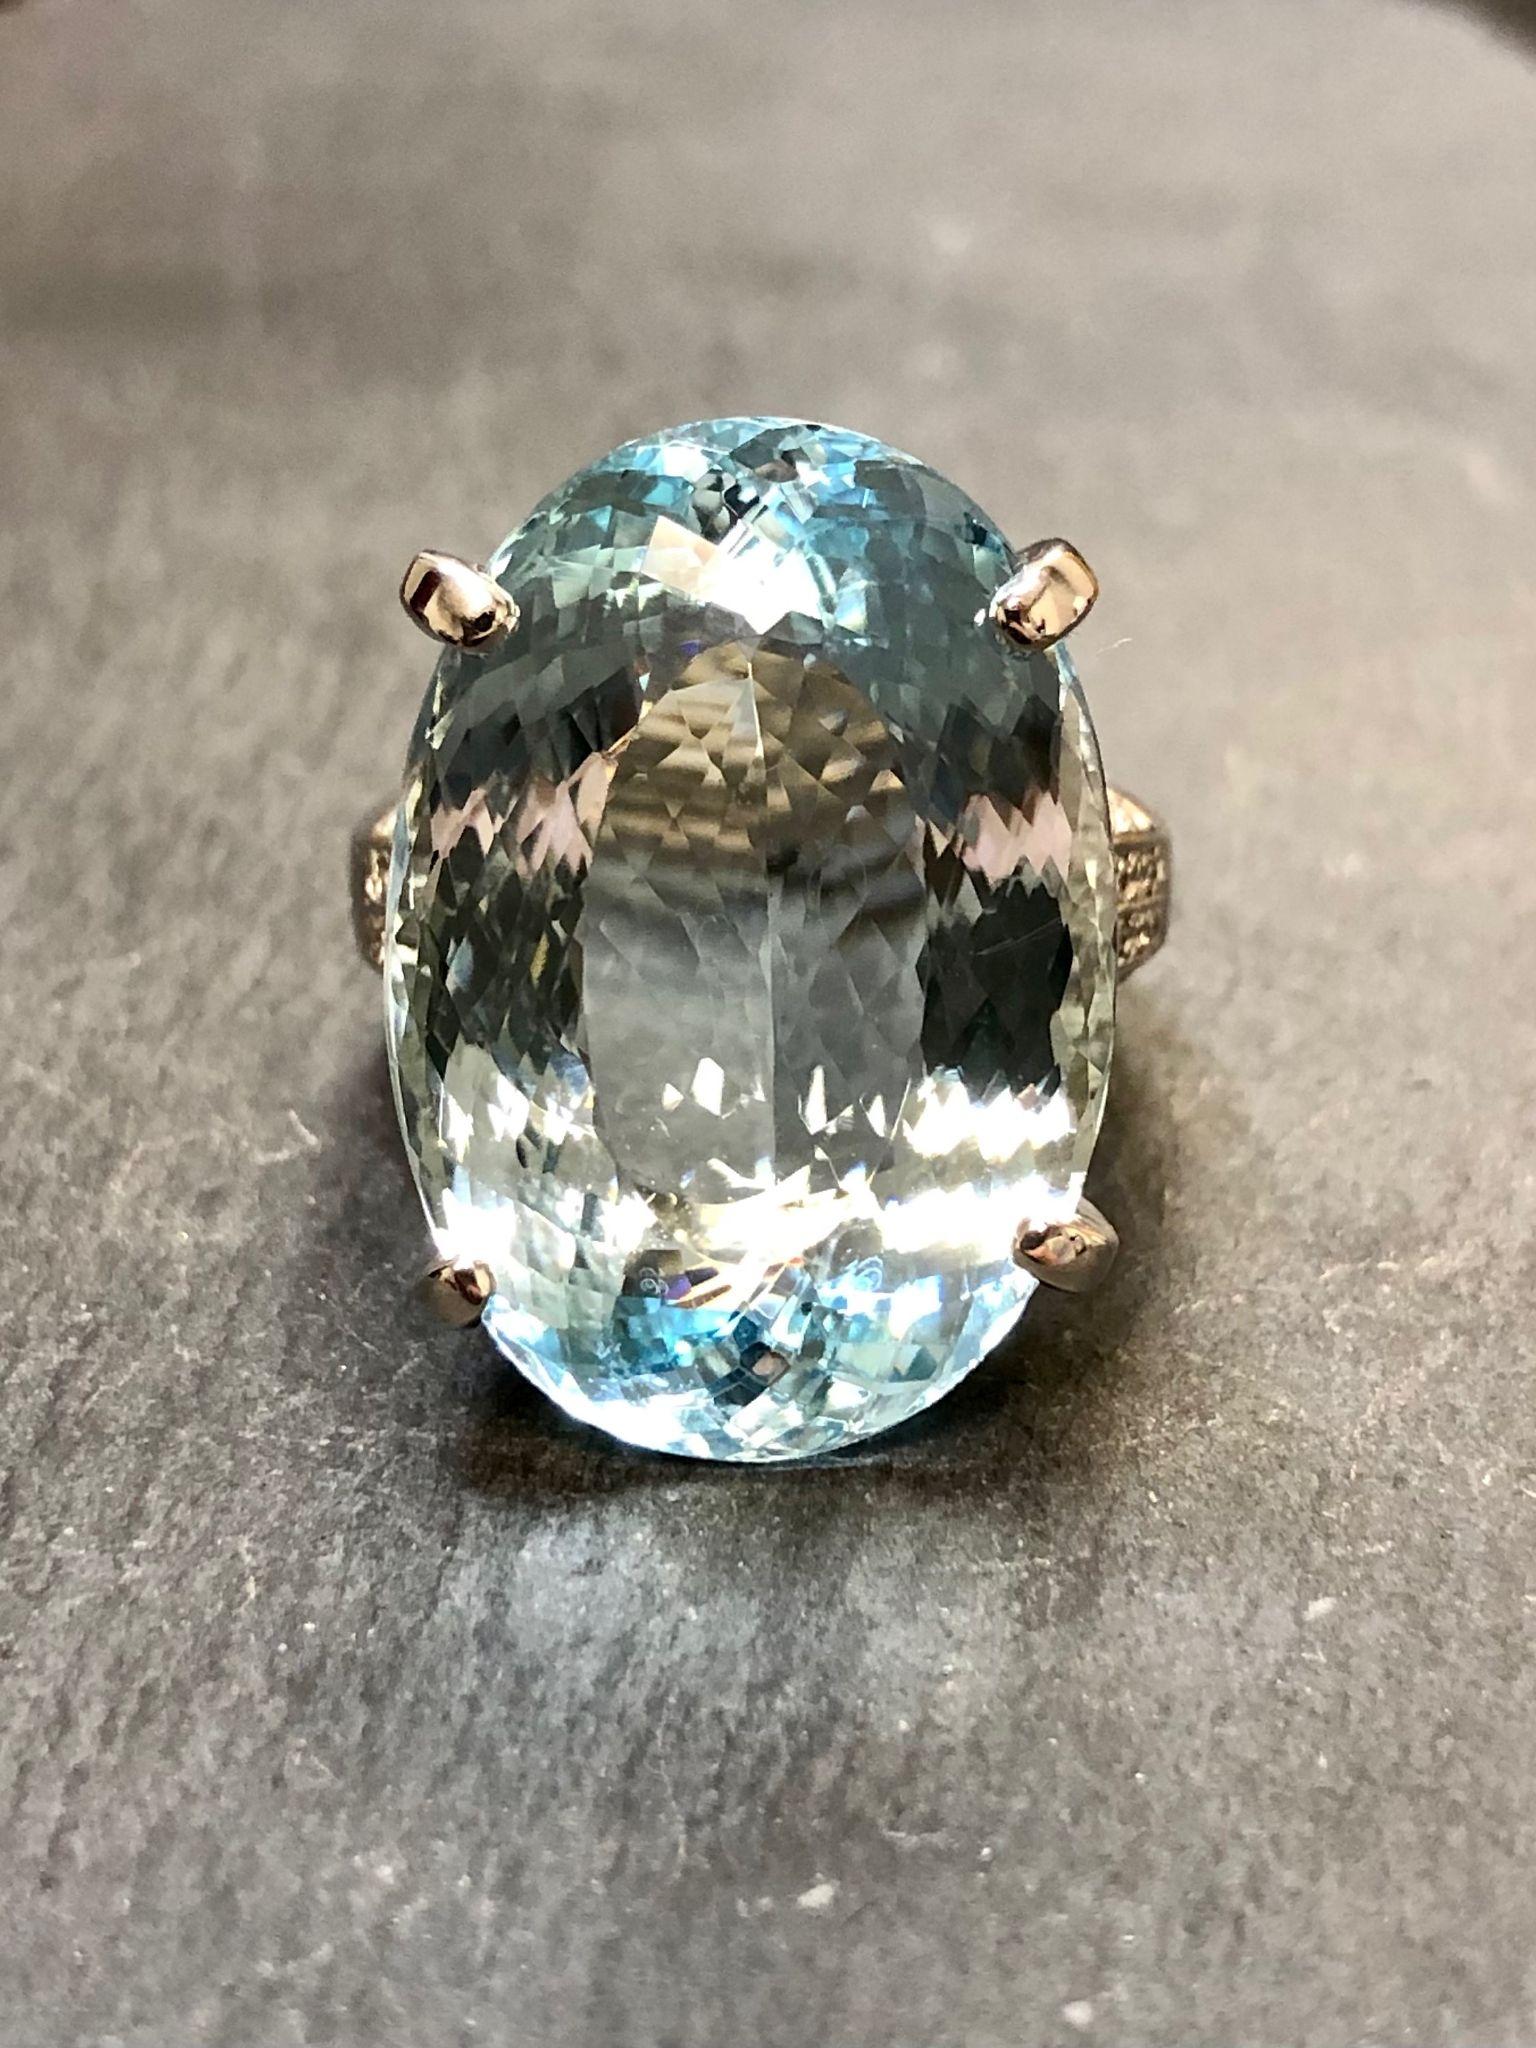 This fabulous ring has been done in platinum and set with .16cttw in H-I Vs2-Si1 clarity diamonds and centered by an oval natural aquamarine weighing 28.42ct. The color is a medium blue tone and exemplary of better aquamarine material used in finer